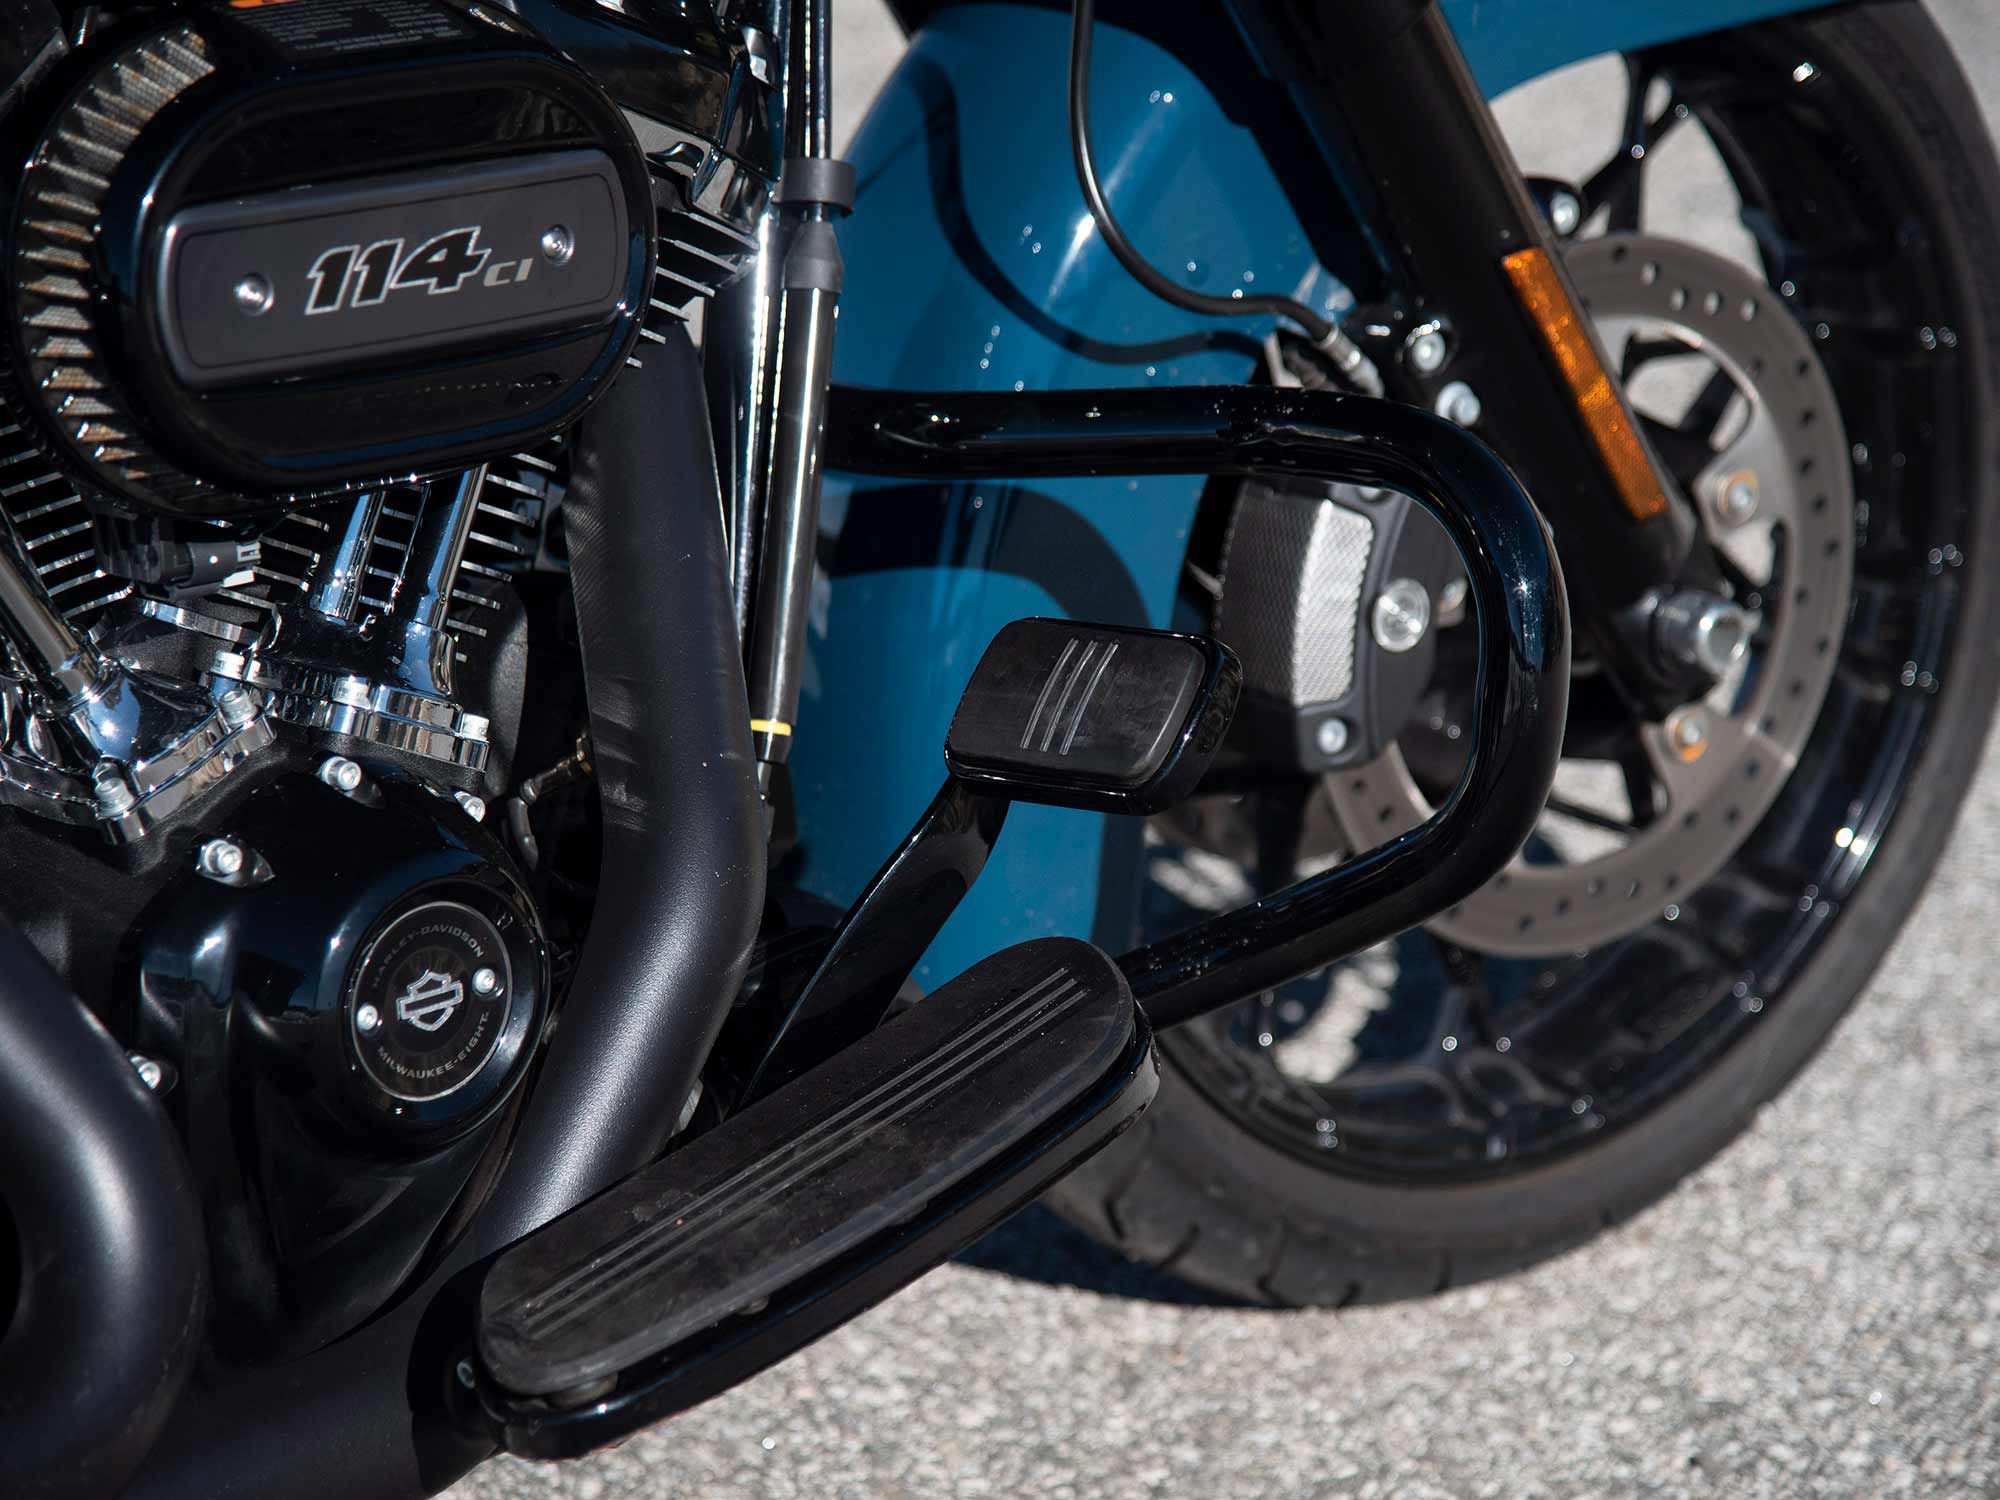 Engine guards are more spacious than in Harley’s upright Touring models, allowing more room around the brake pedal and shifter.